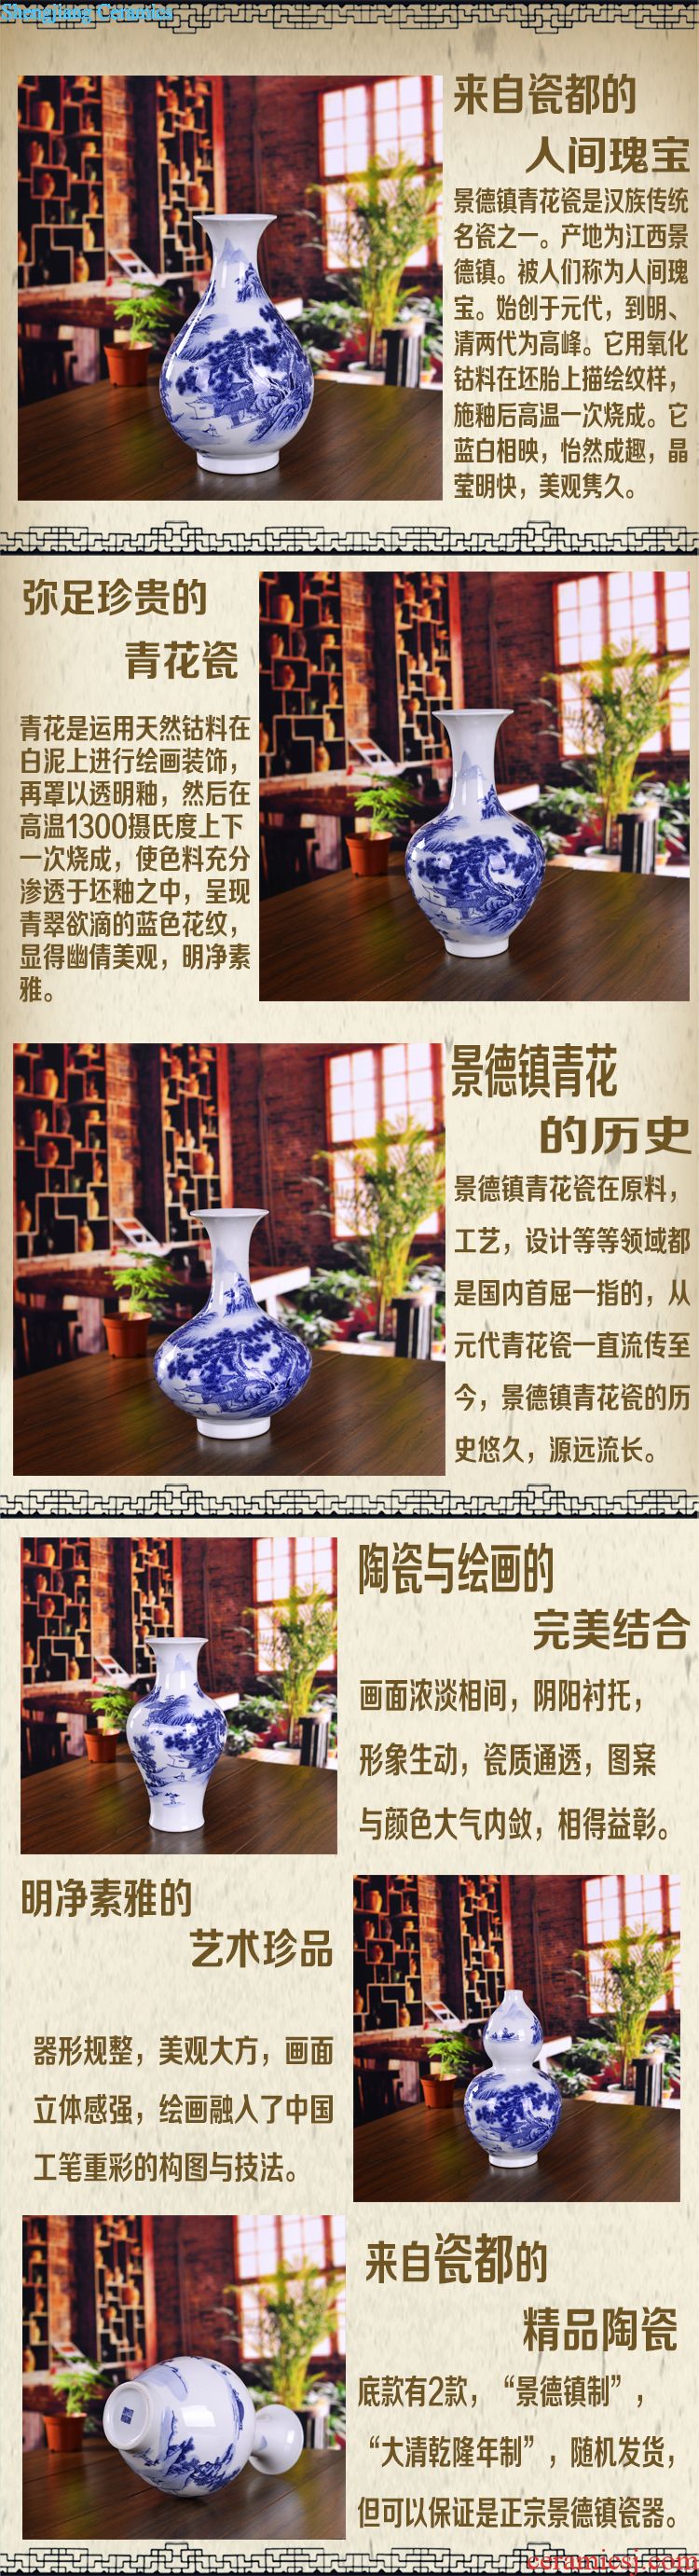 Jingdezhen blue and white ceramics seal pot Chinese candy jar home sitting room storage pot cover kitchen furnishing articles